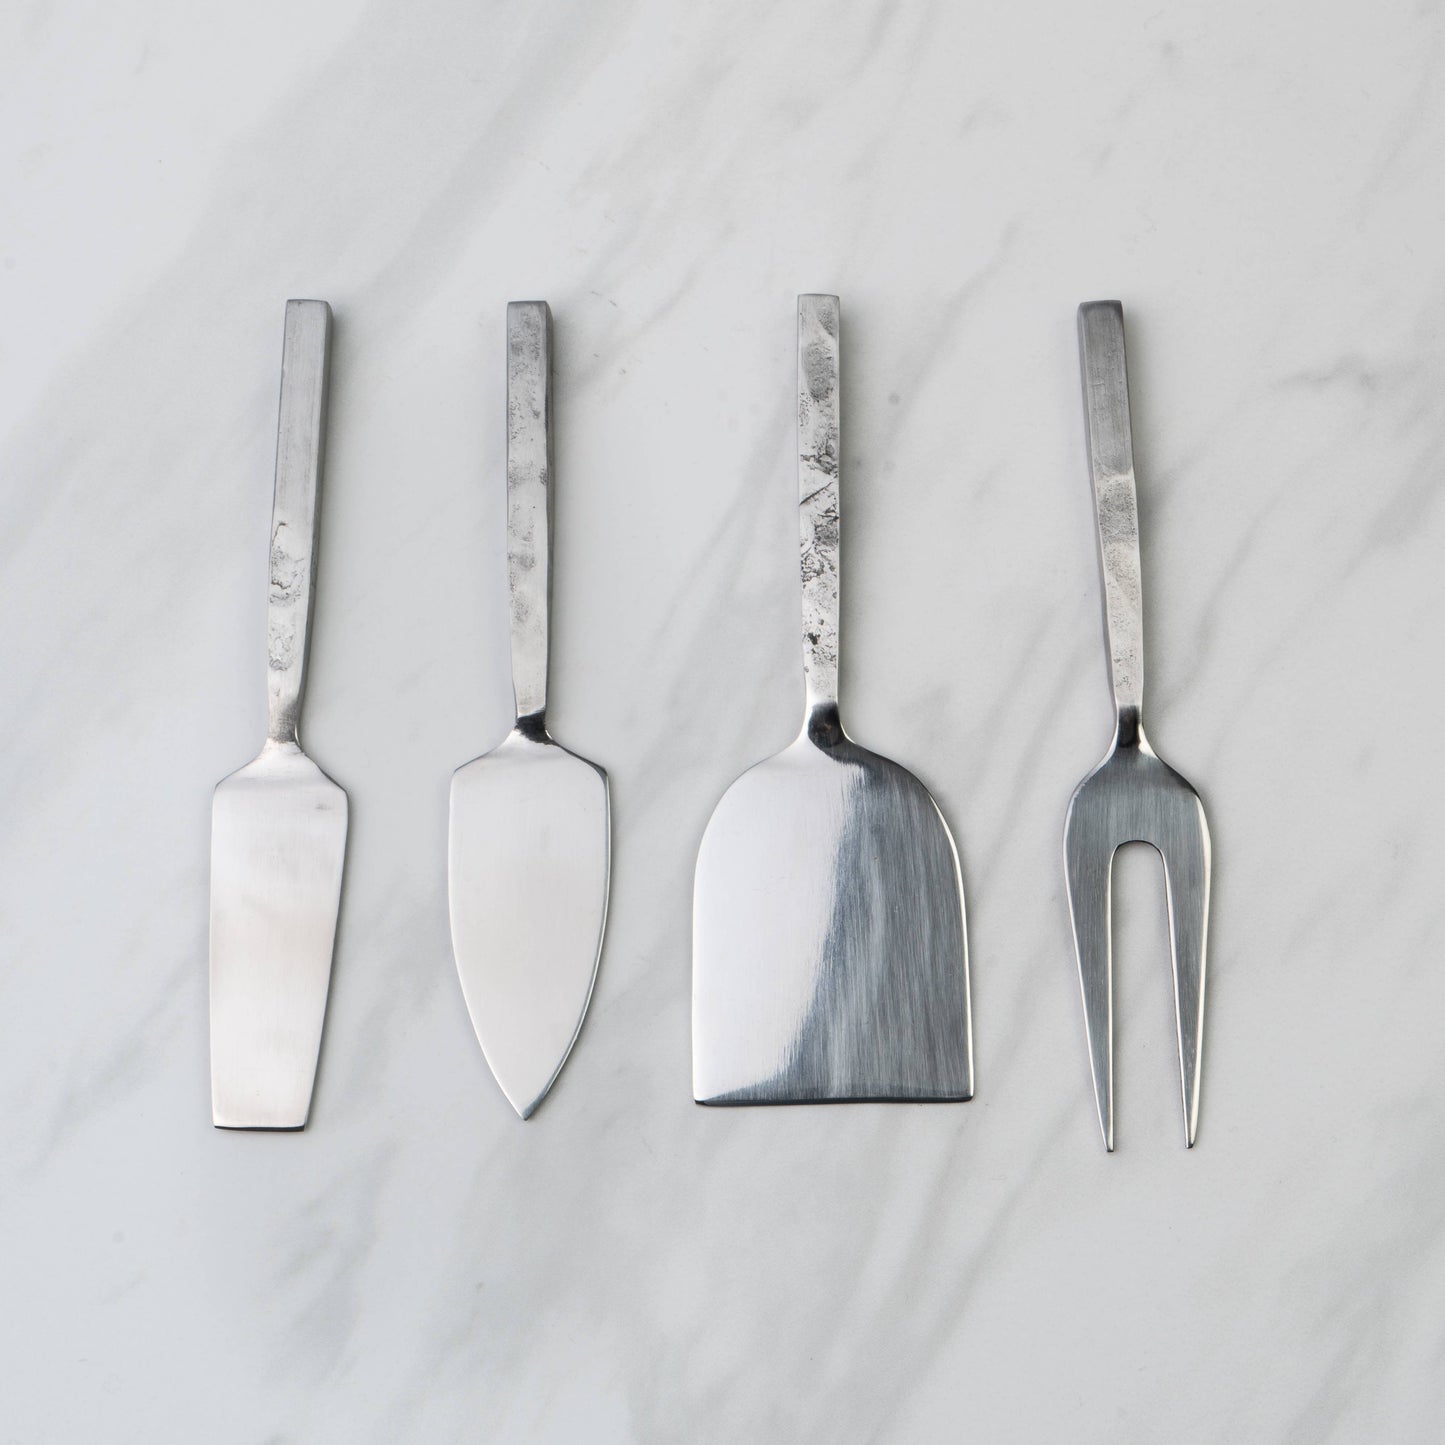 6" SS TEXTURE CHEESE SET